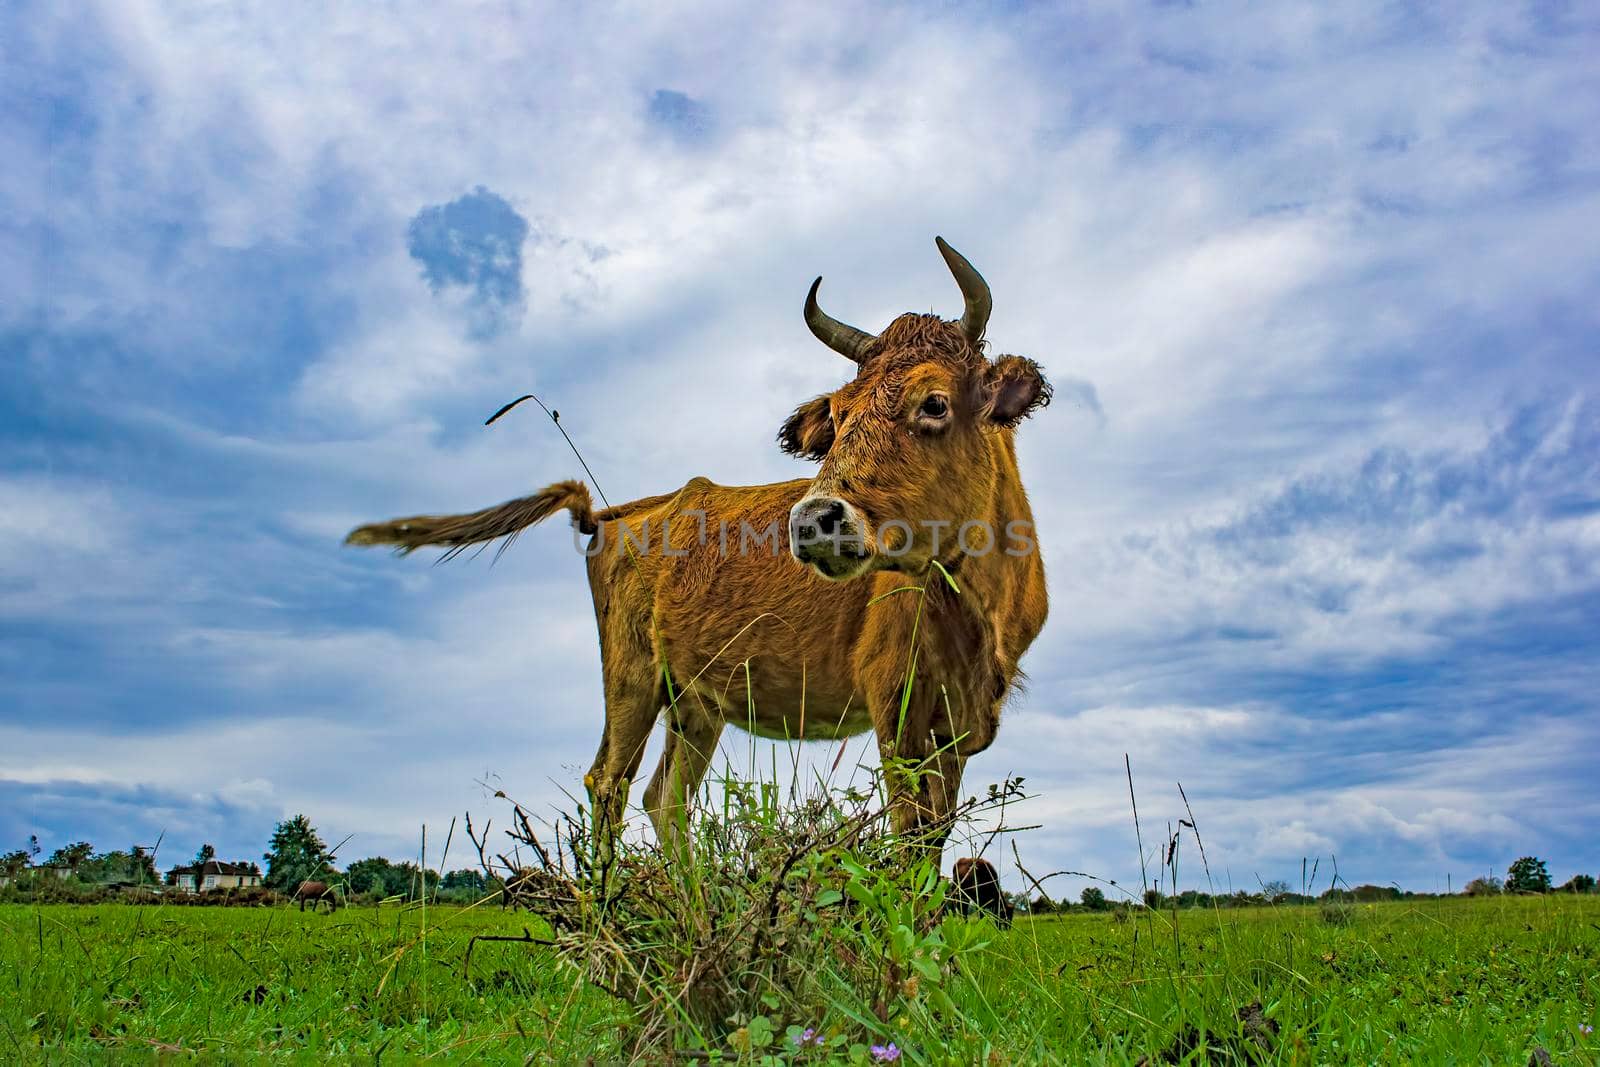 Red cow on the background of a green field and cloudy sky.